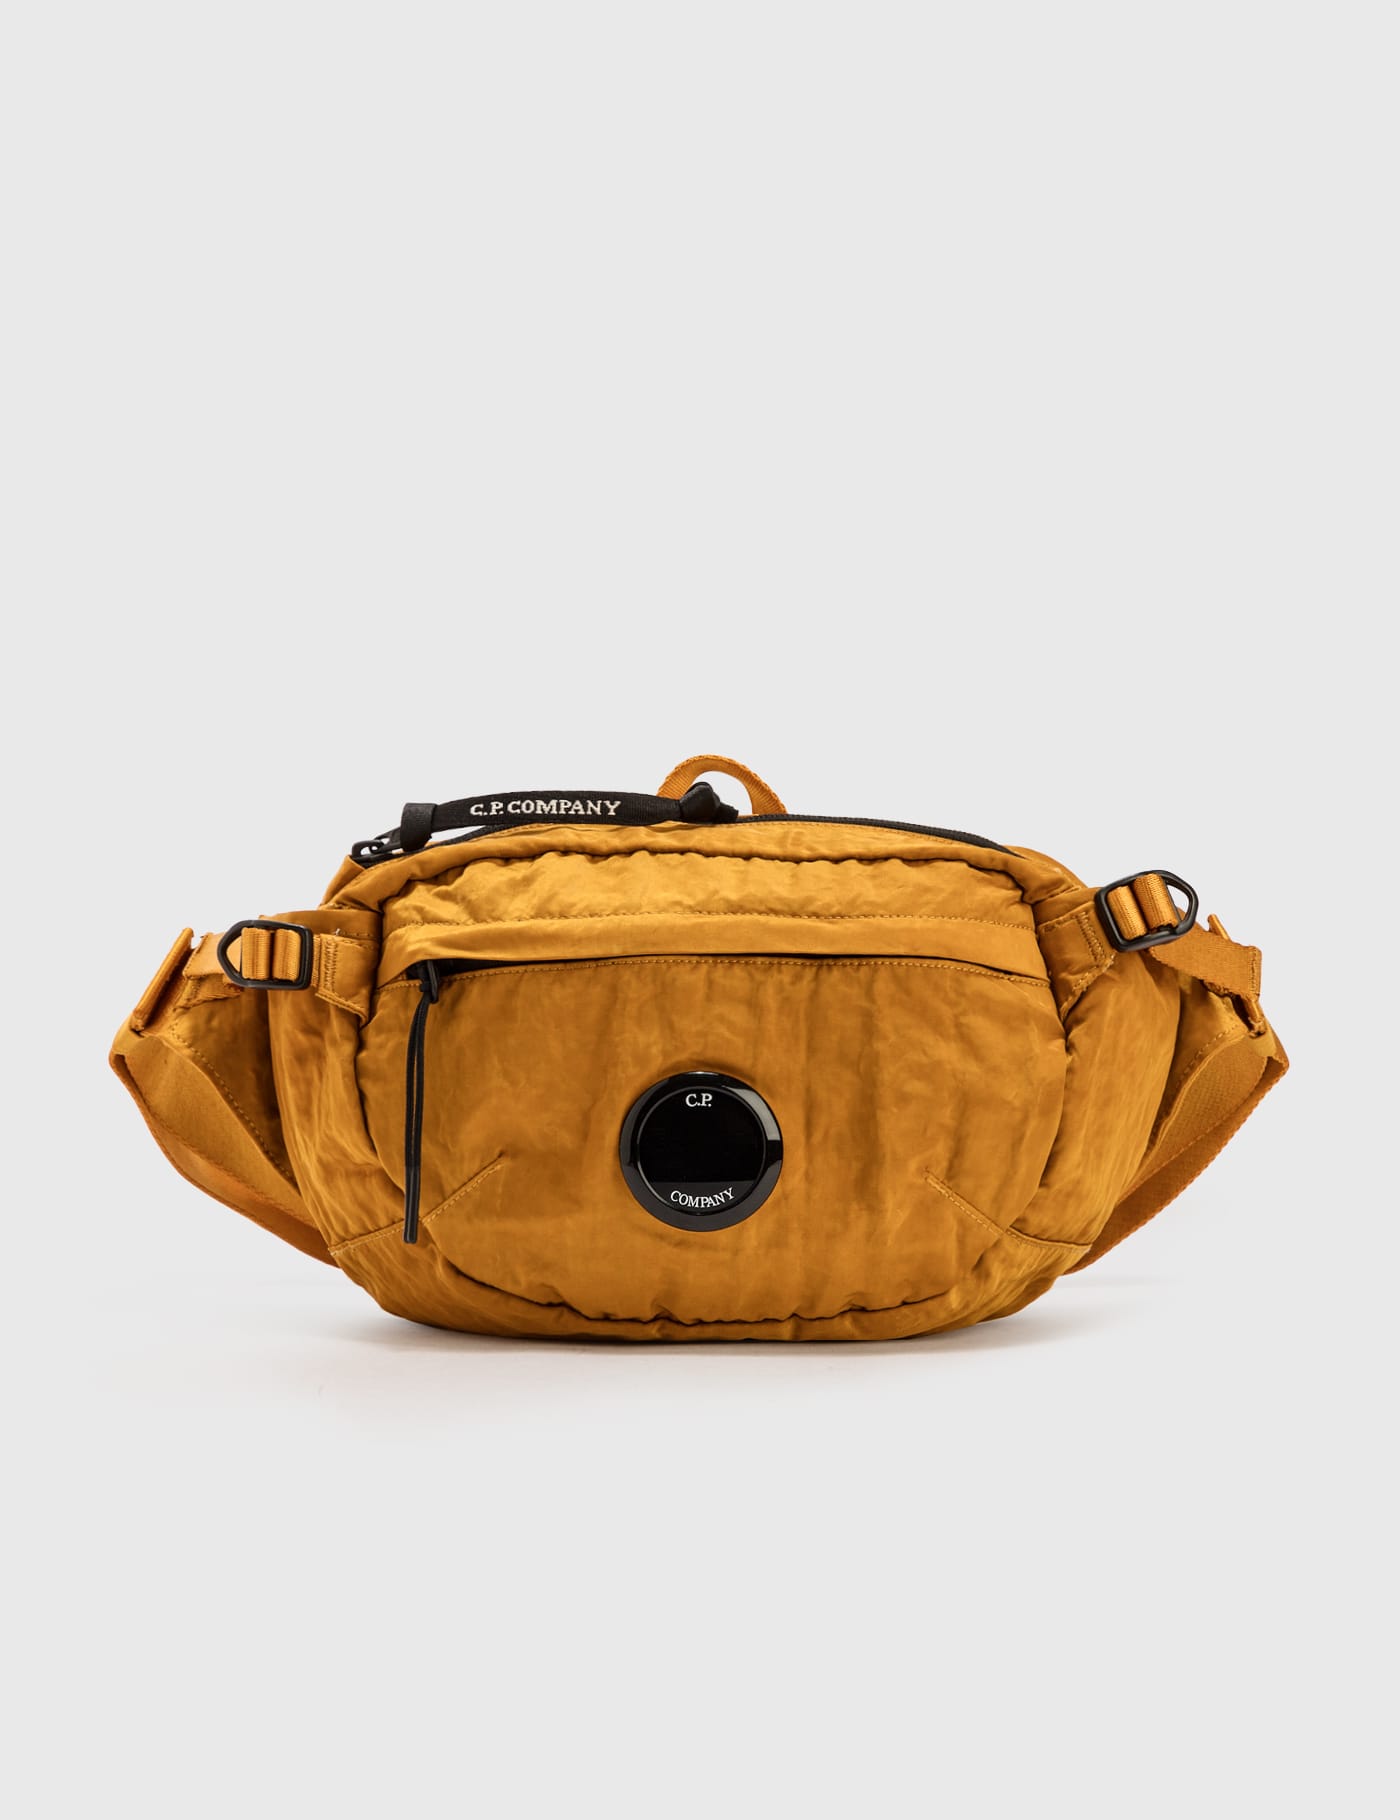 C.P. Company - Nylon Lens Crossbody Bag | HBX - Globally Curated Fashion  and Lifestyle by Hypebeast